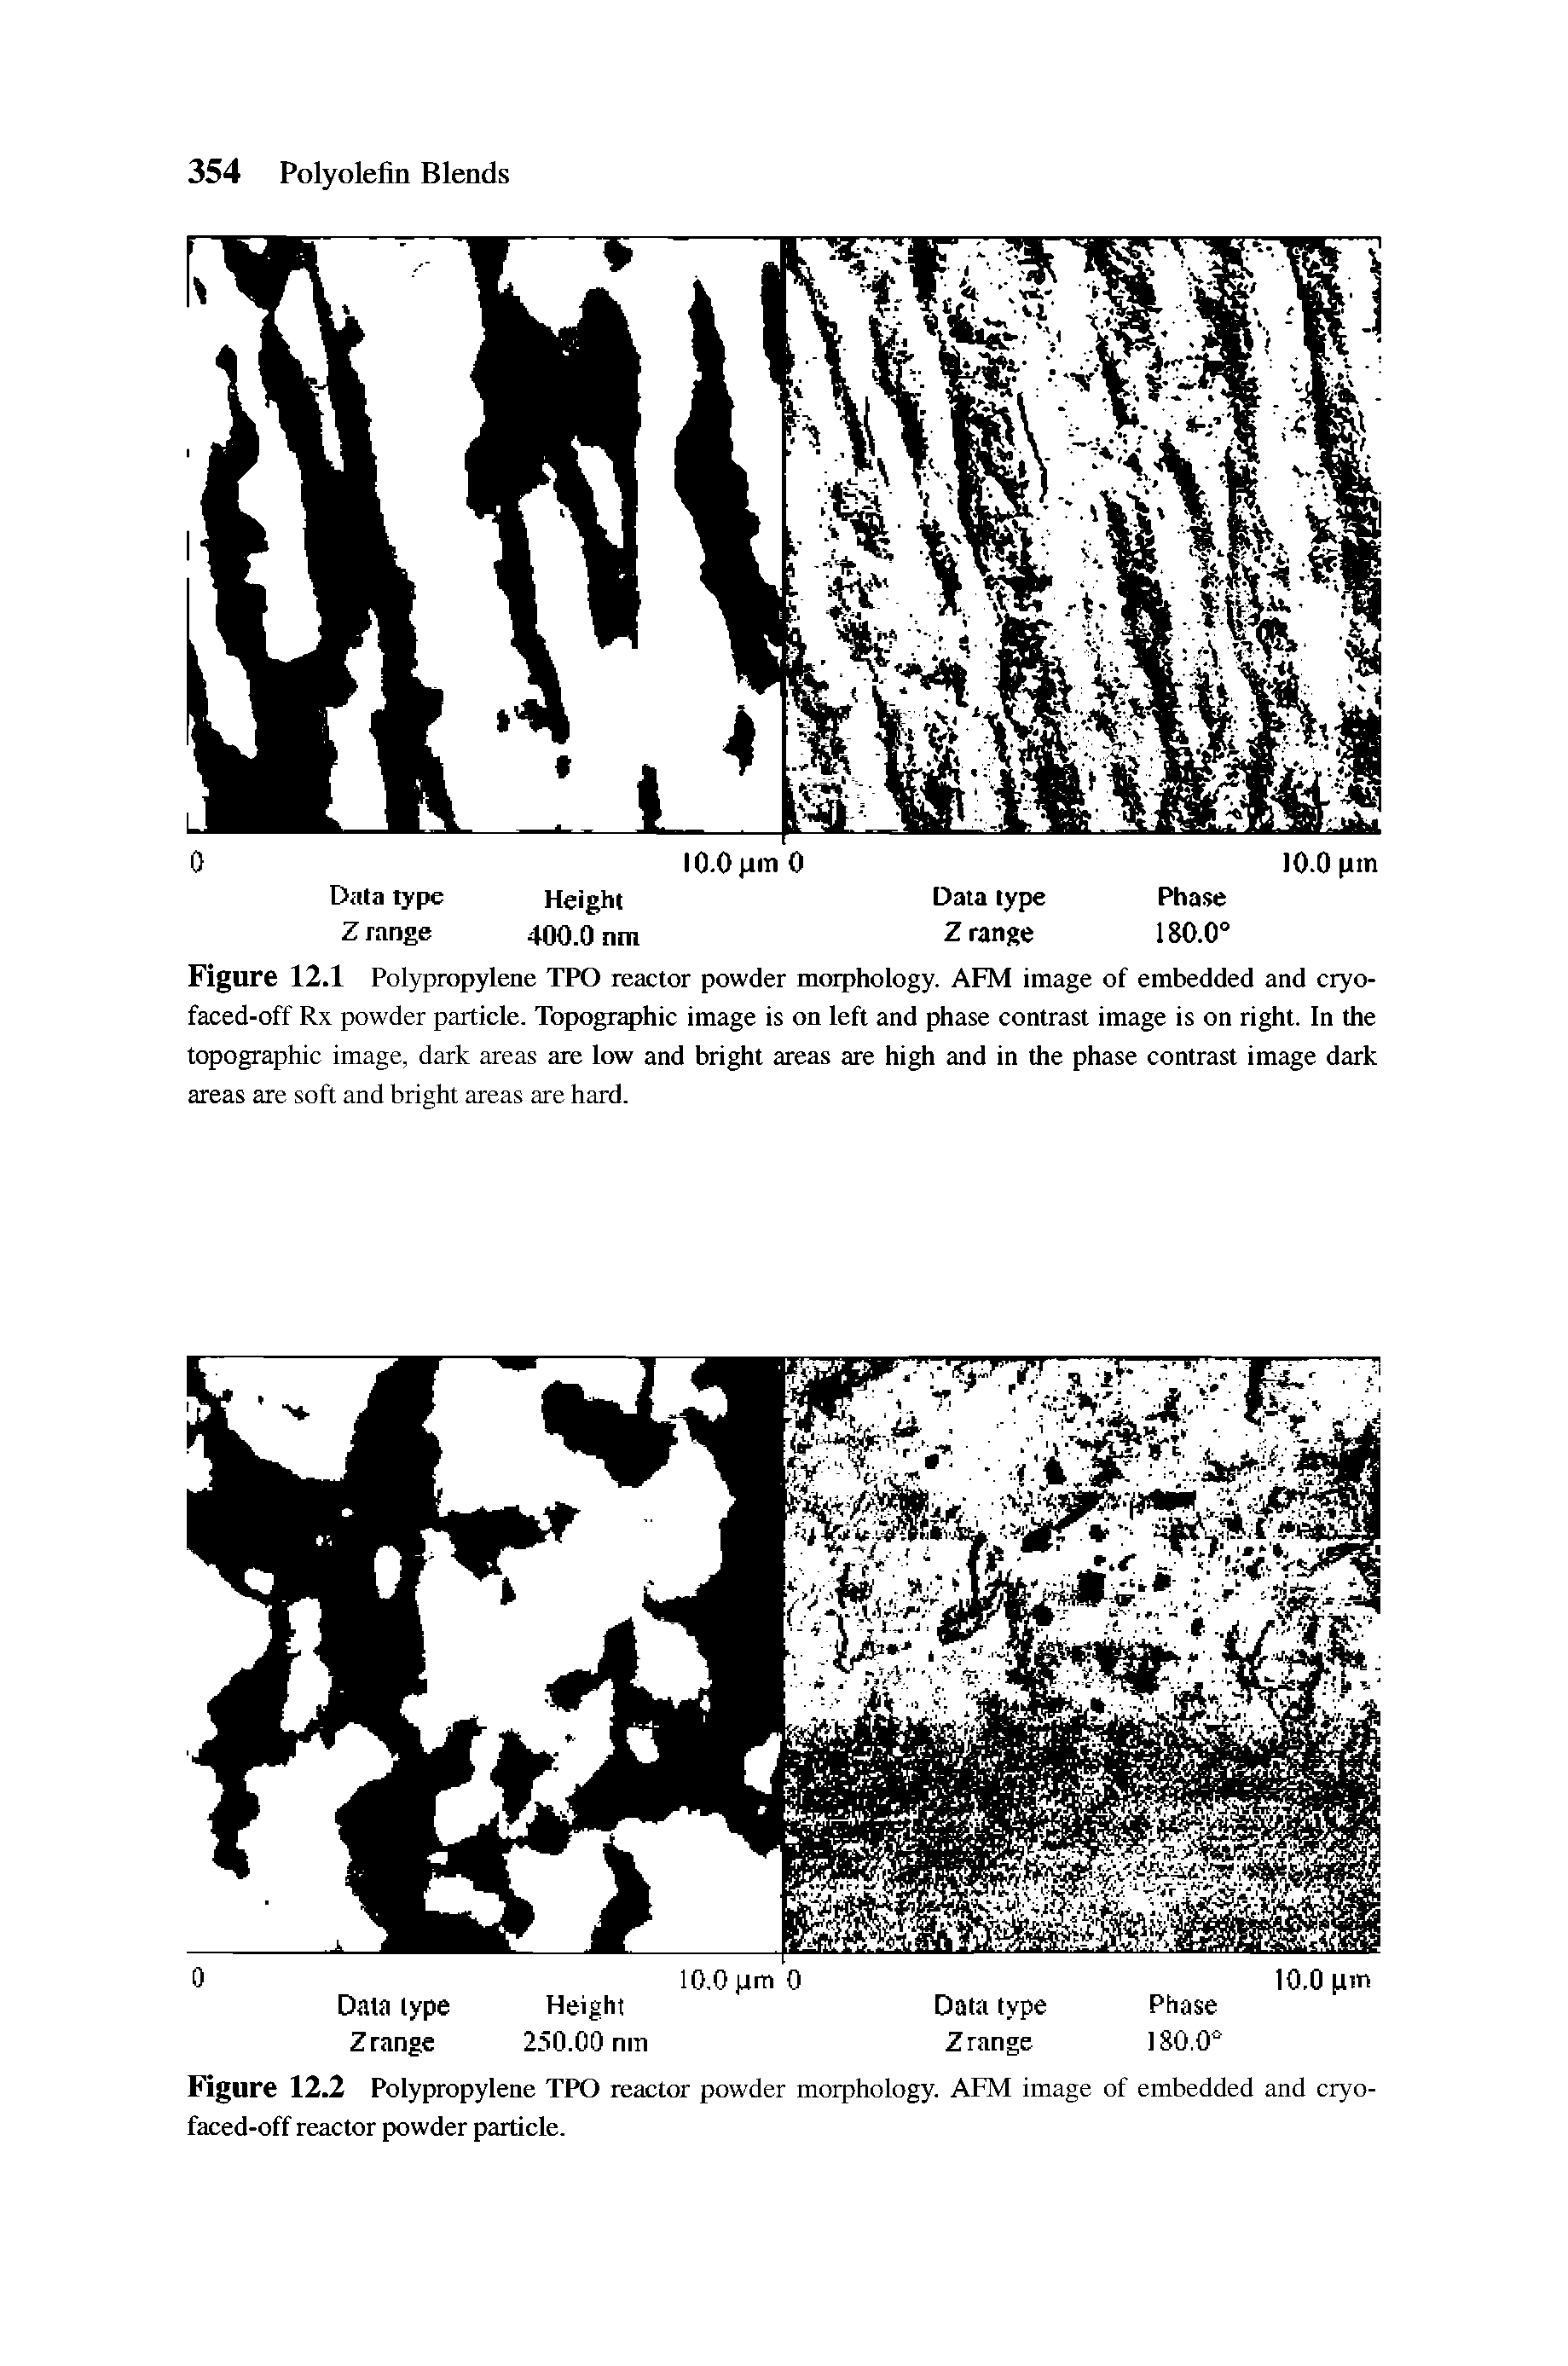 Figure 12.2 Polypropylene TPO reactor powder morphology. AFM image of embedded and cryo-faced-off reactor powder particle.